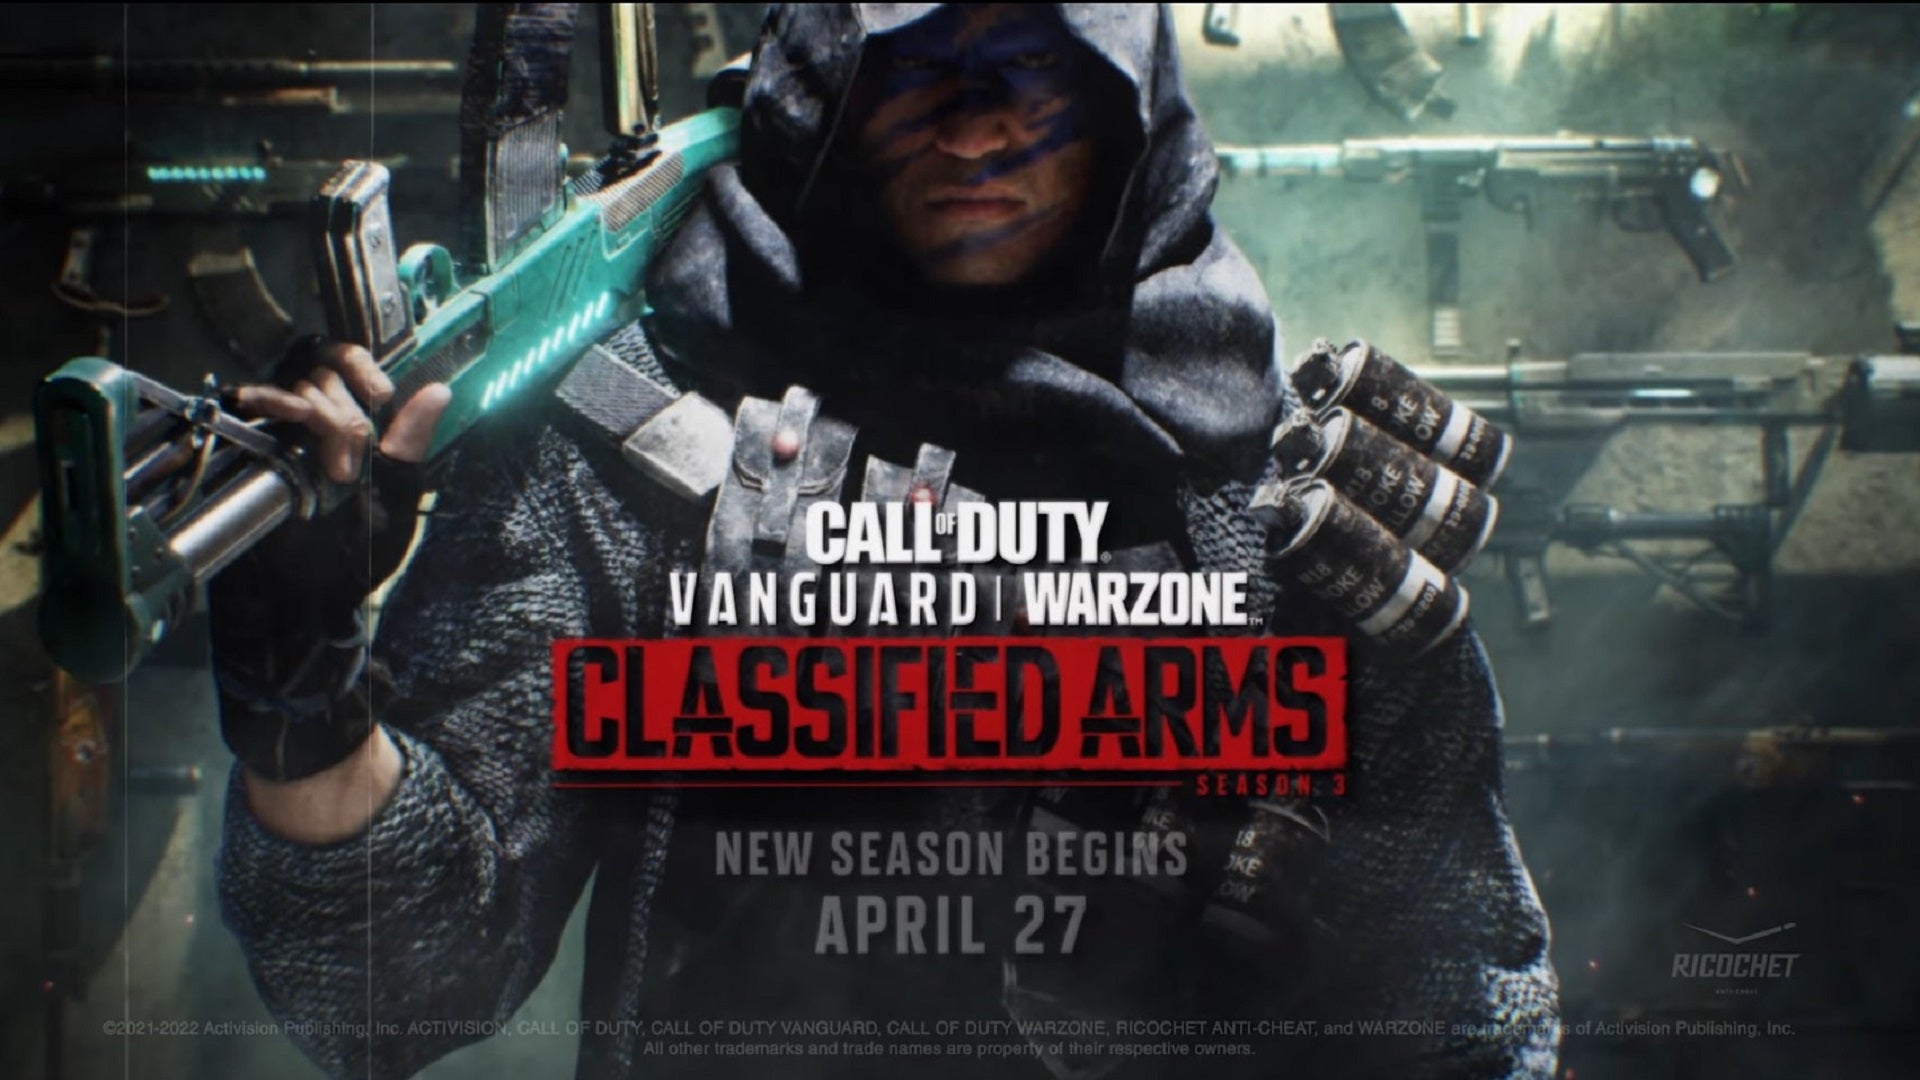 The Warzone season 3 promotional image, showing an armed soldier facing the camera with the April 27 release date below.